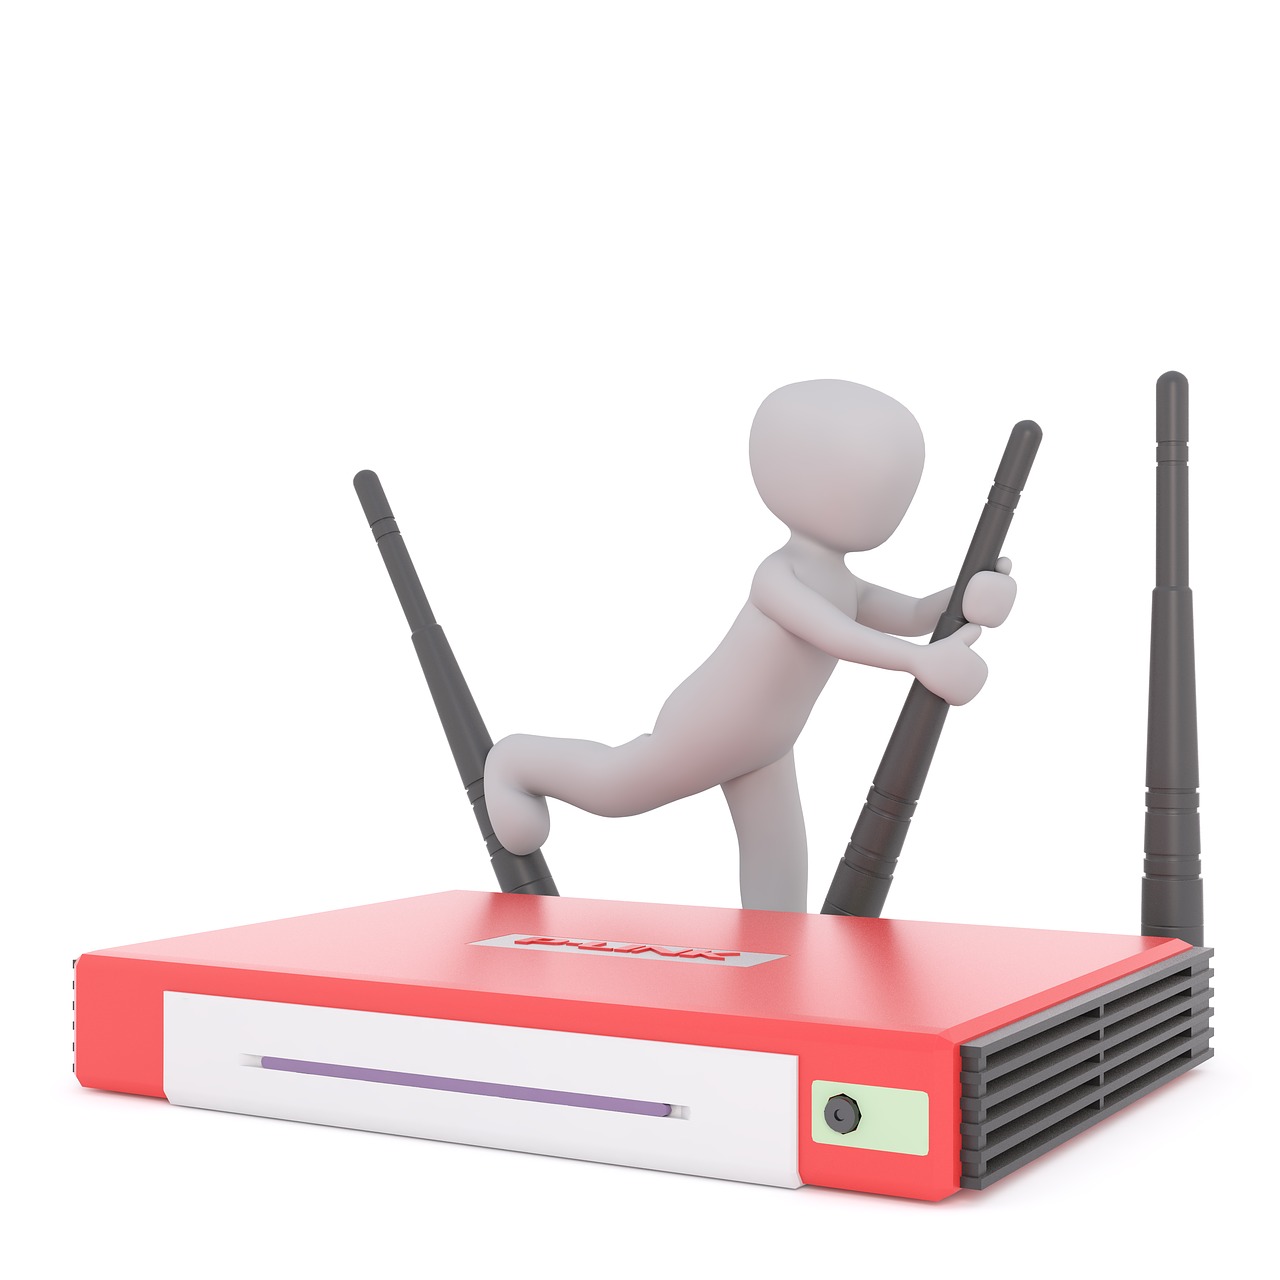 Improve The Speed Of Your Router